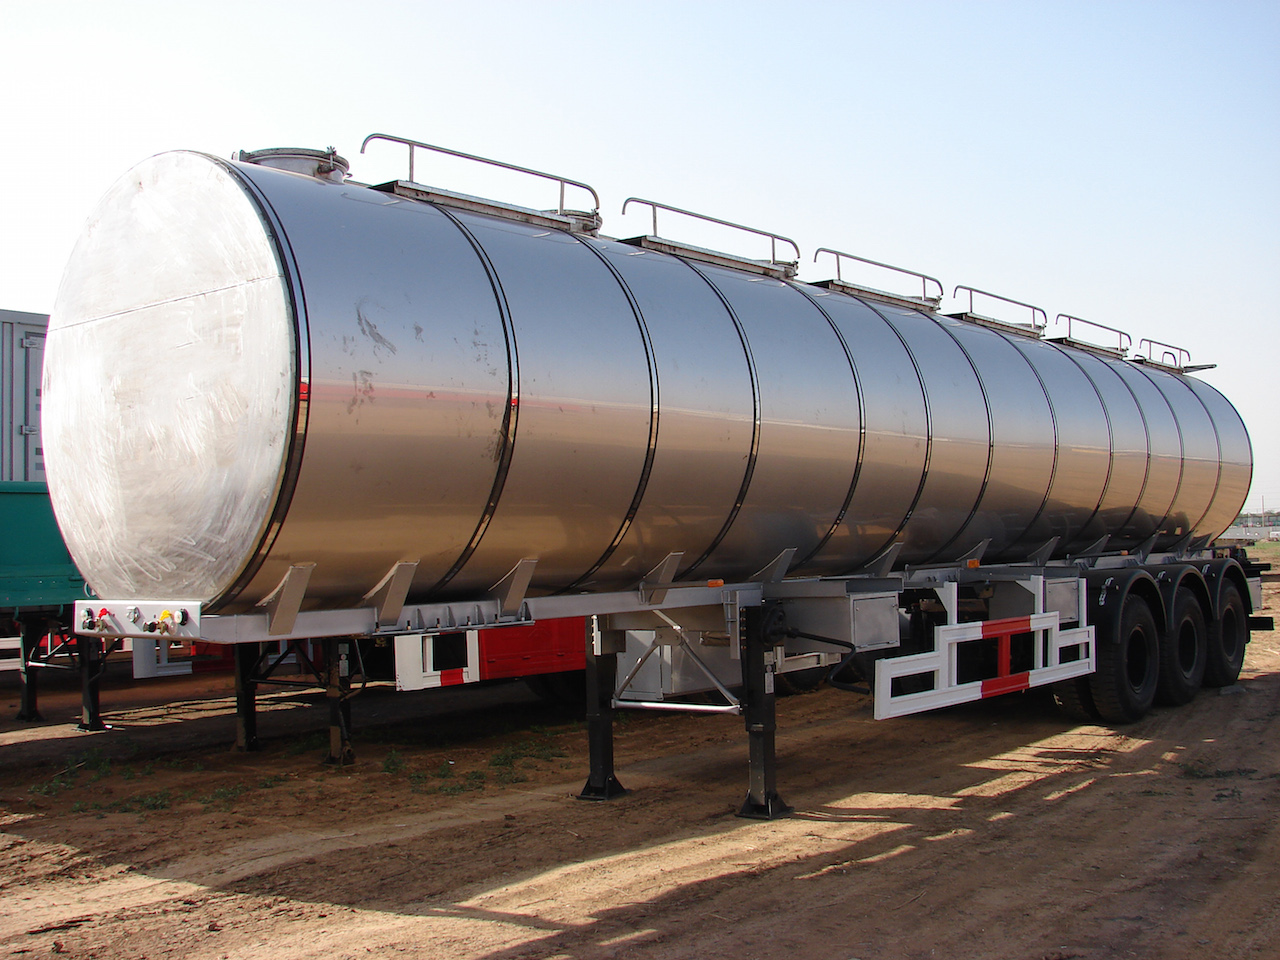 30000L Stainless Steel Tanker Semi-Trailer with 3 BPW Alxes for Grape Wine And Milk